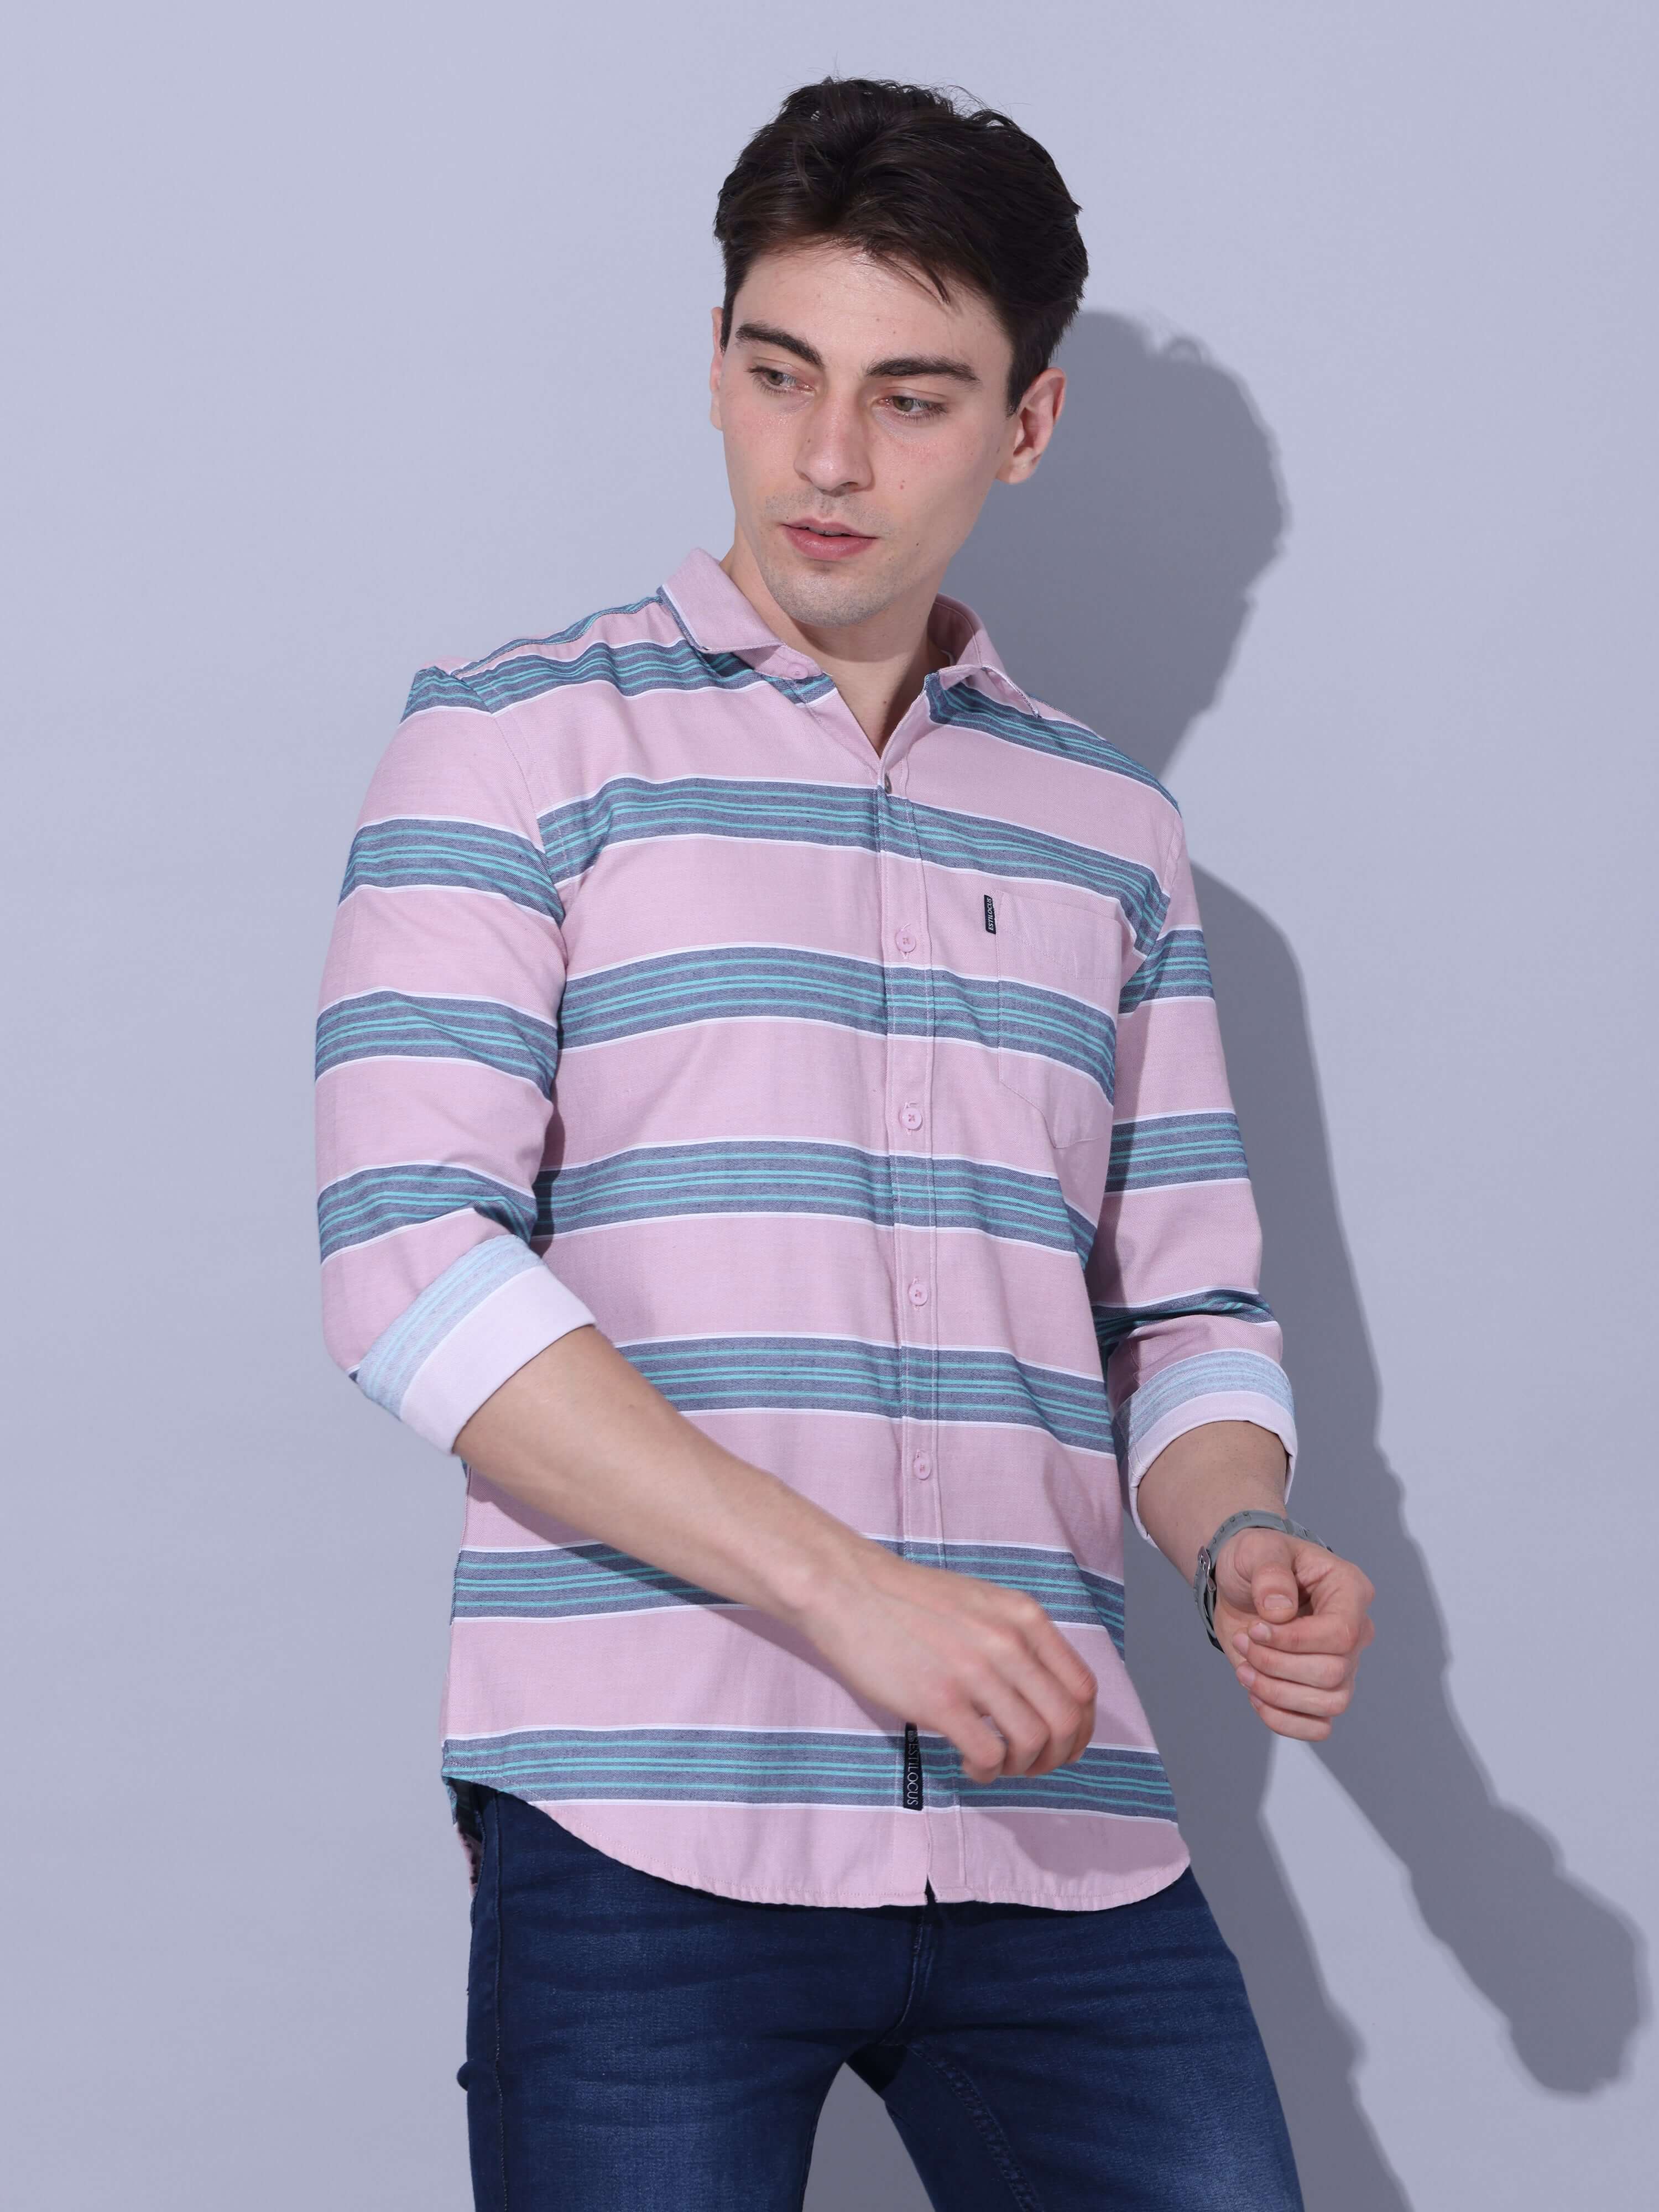 Stripes Casual Shirt shop online at Estilocus. • Full-sleeve stripe shirt • Cut and sew placket • Regular collar • Double button round cuff. • Single pocket • Curved hemline • Finest quality sewing • Machine wash care • Suitable to wear with all types of